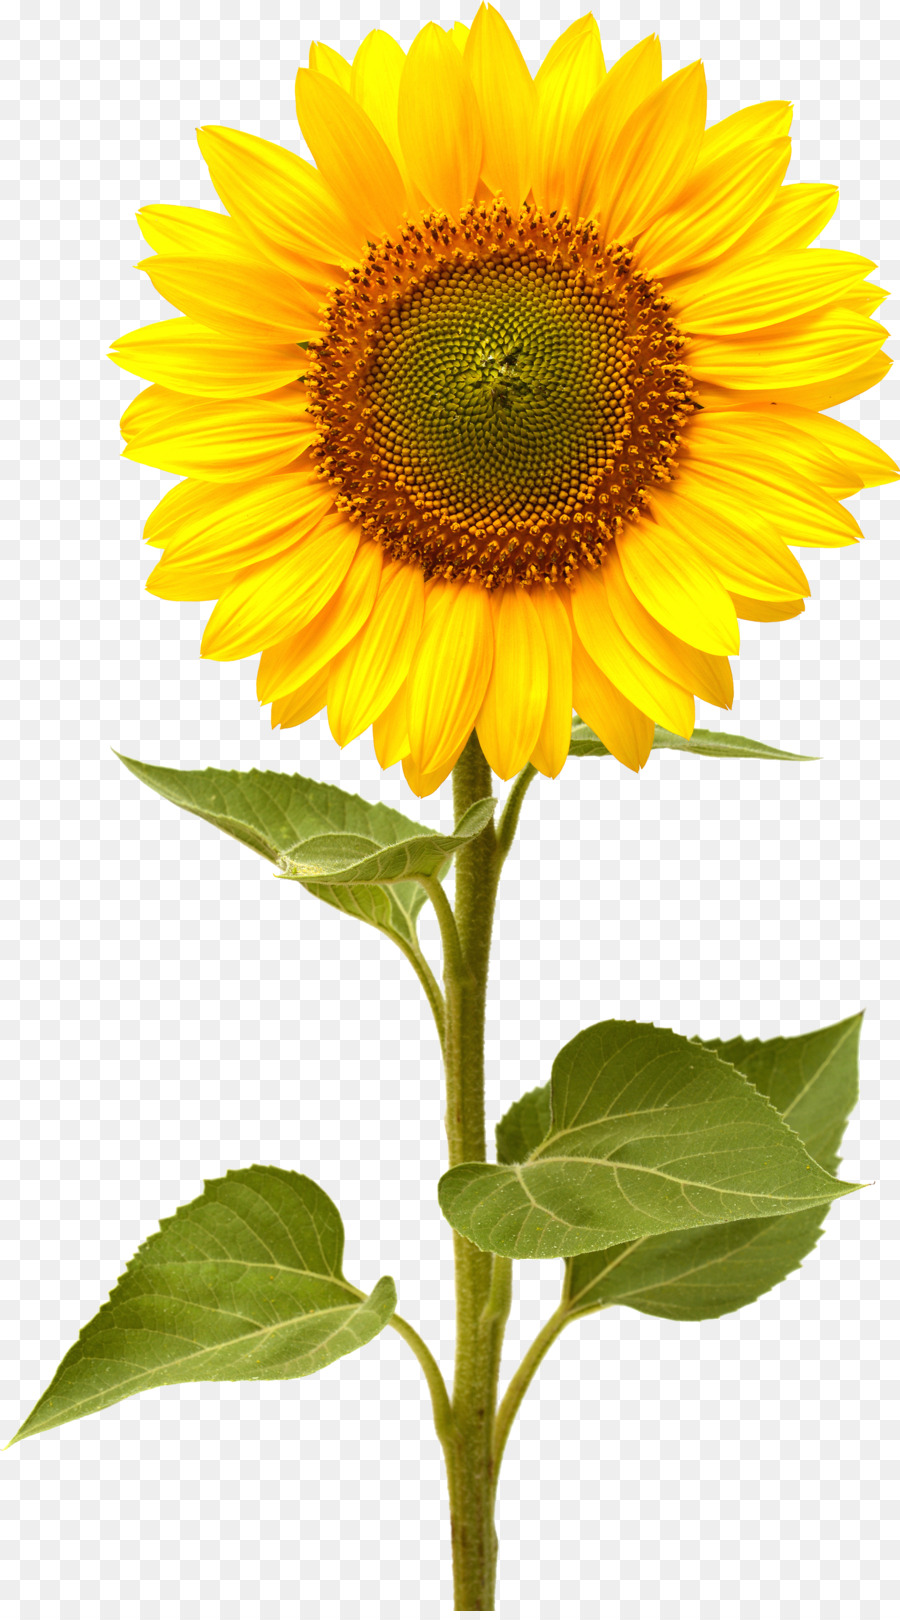 Common sunflower Computer Icons - sunflower png download - 1956*3502 - Free Transparent Common Sunflower png Download.